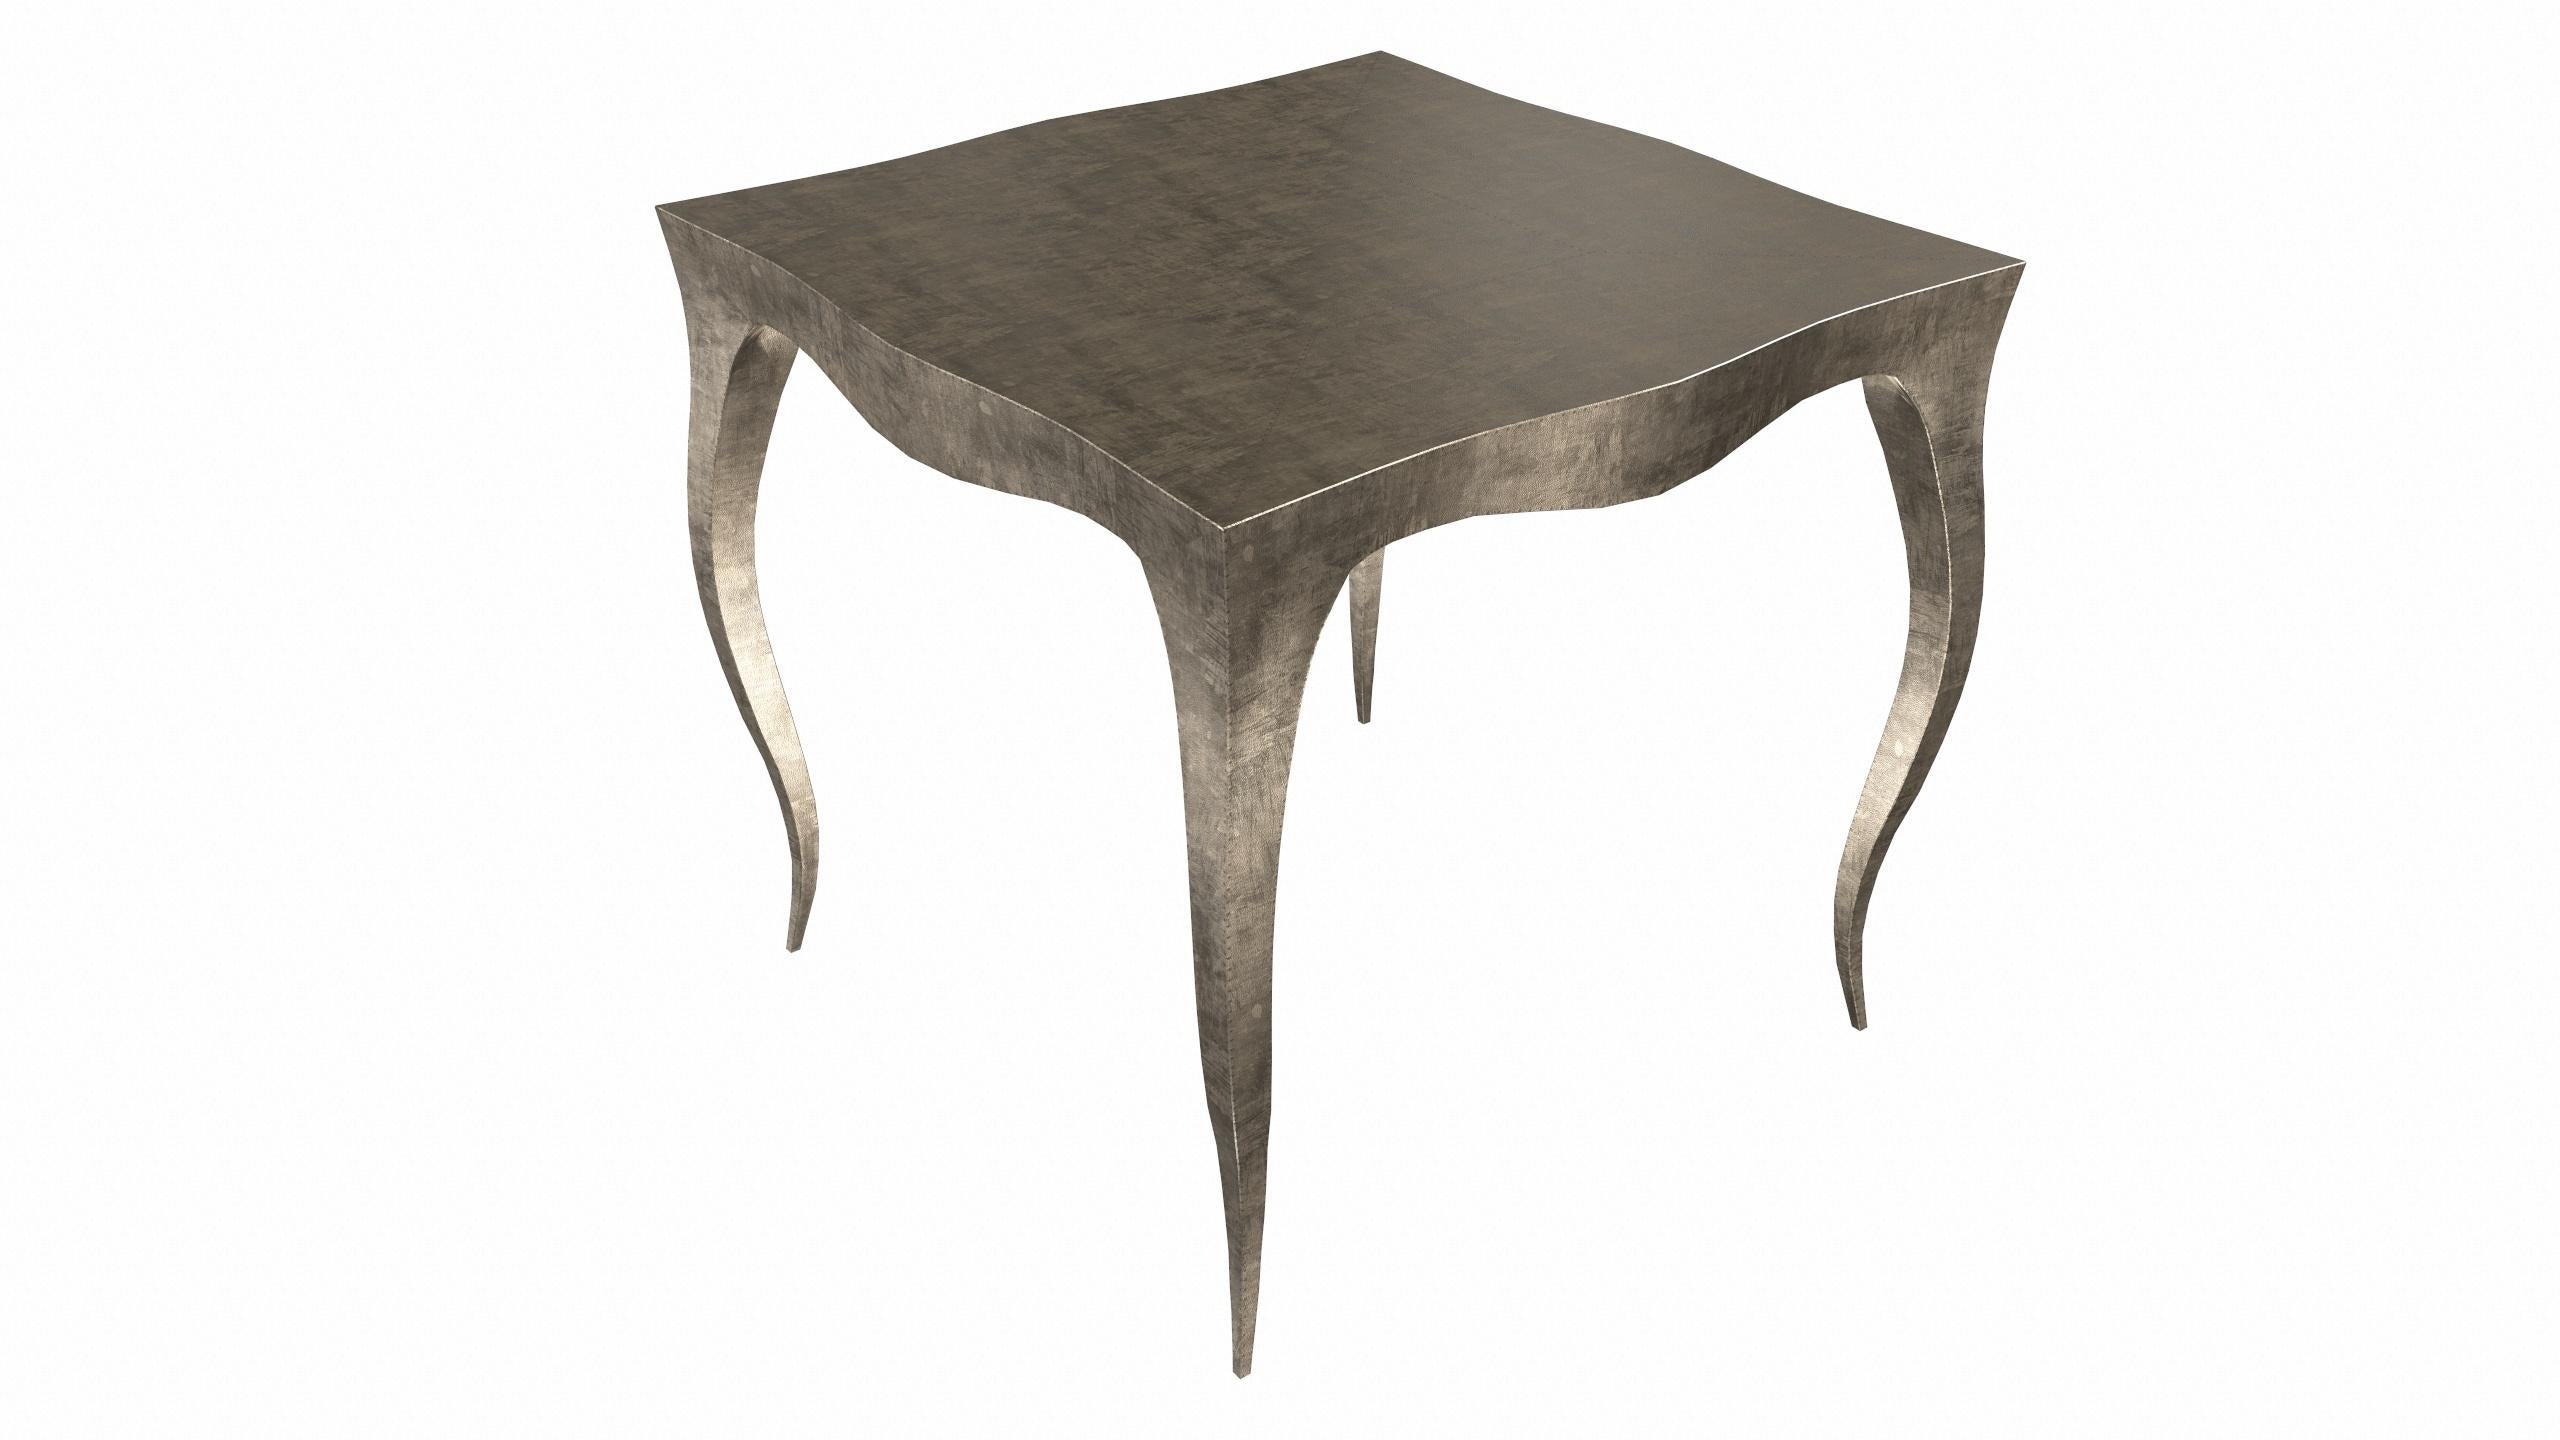 Metal Louise Art Deco Nesting Tables and Crad Tables in Fine Hammered Antique by Paul For Sale